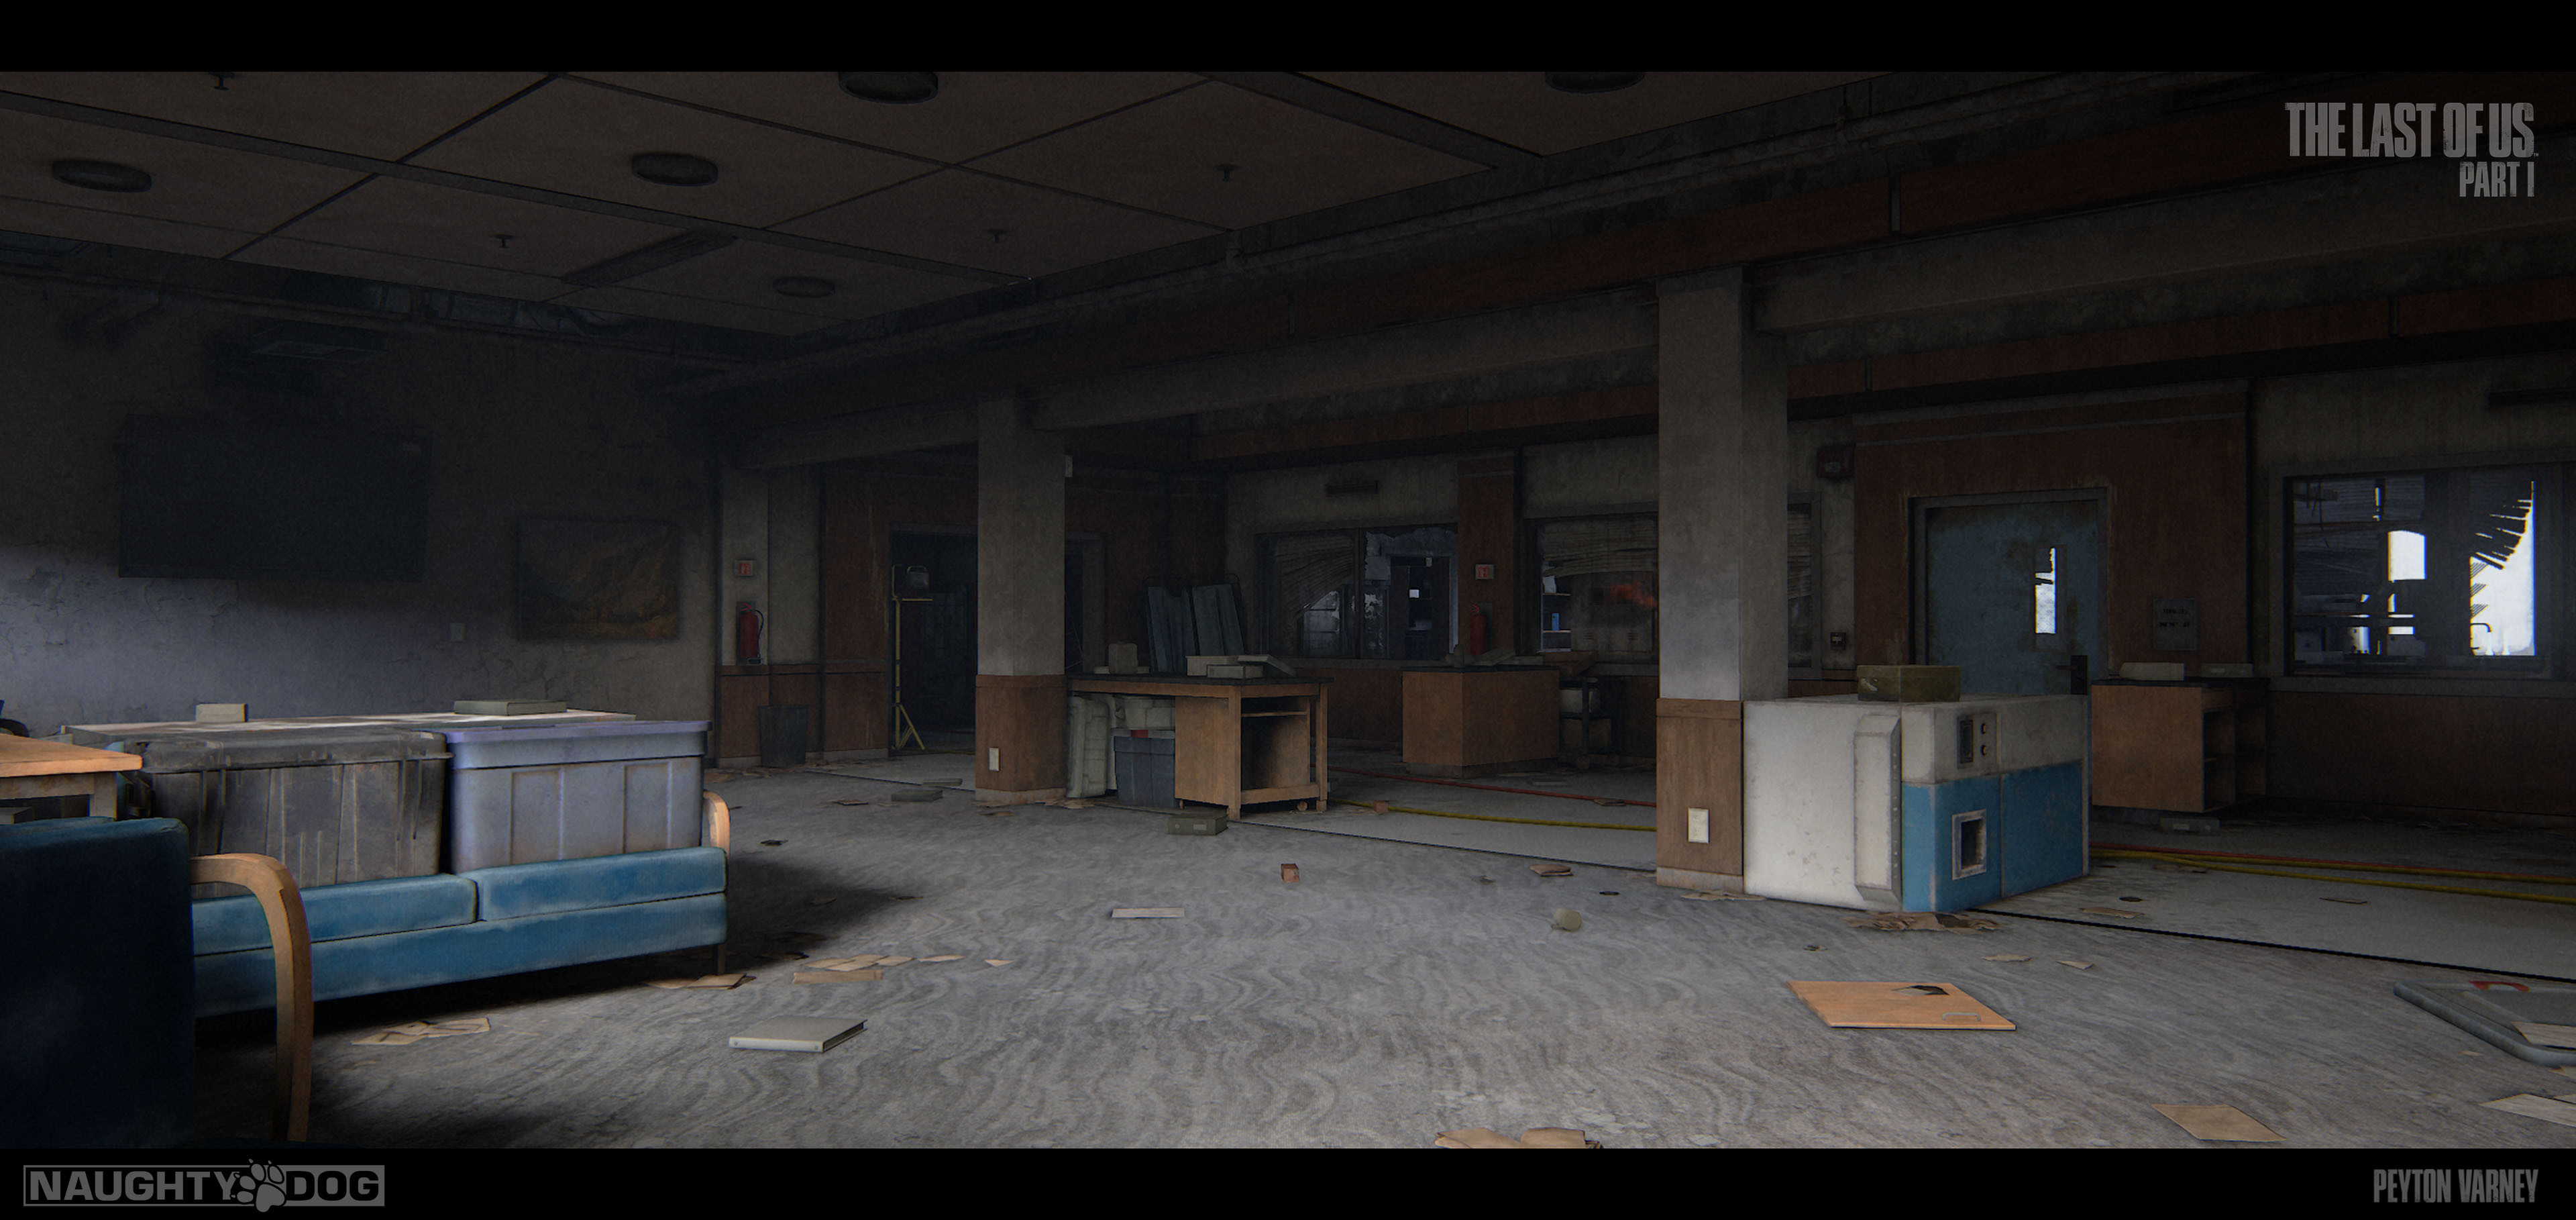 The Last of Us - The Cutting Room Floor